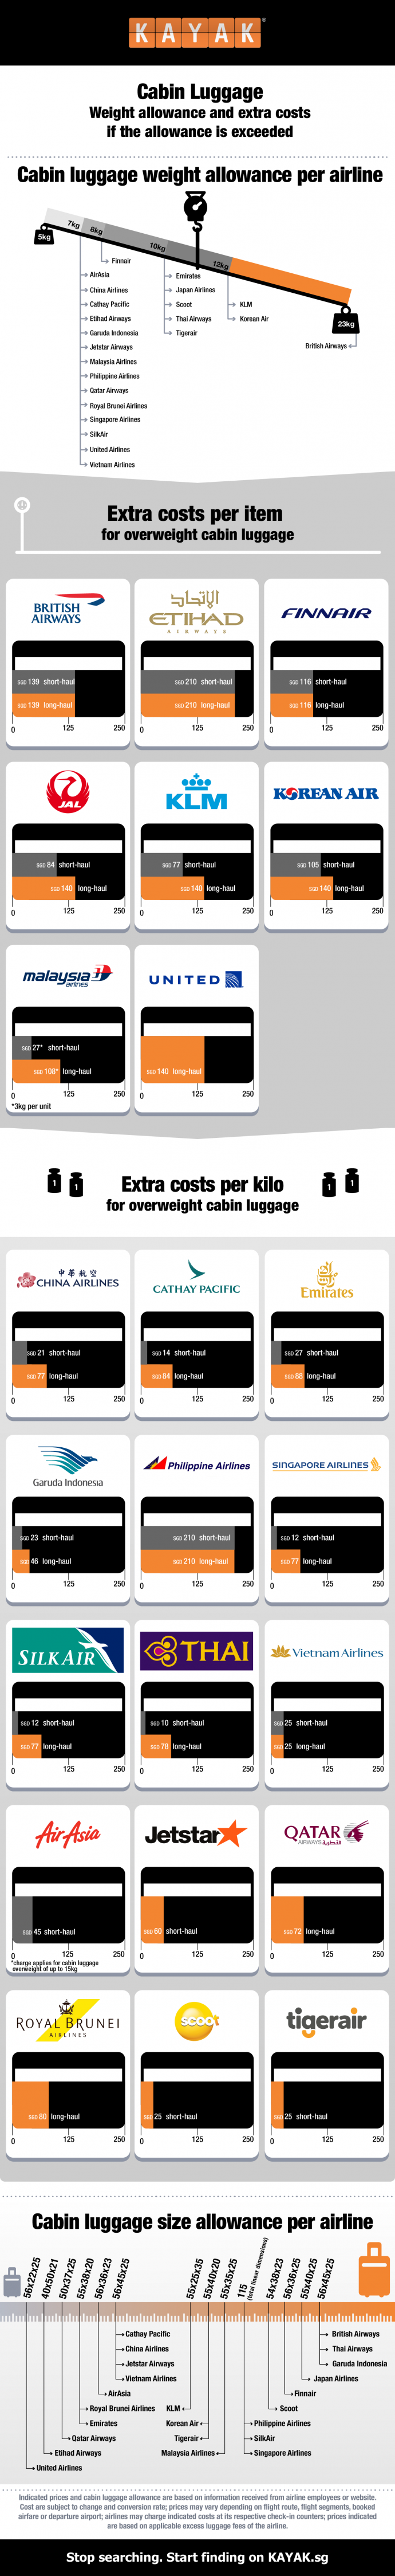 KAYAK.sg reveals costs for excess cabin luggage infographic